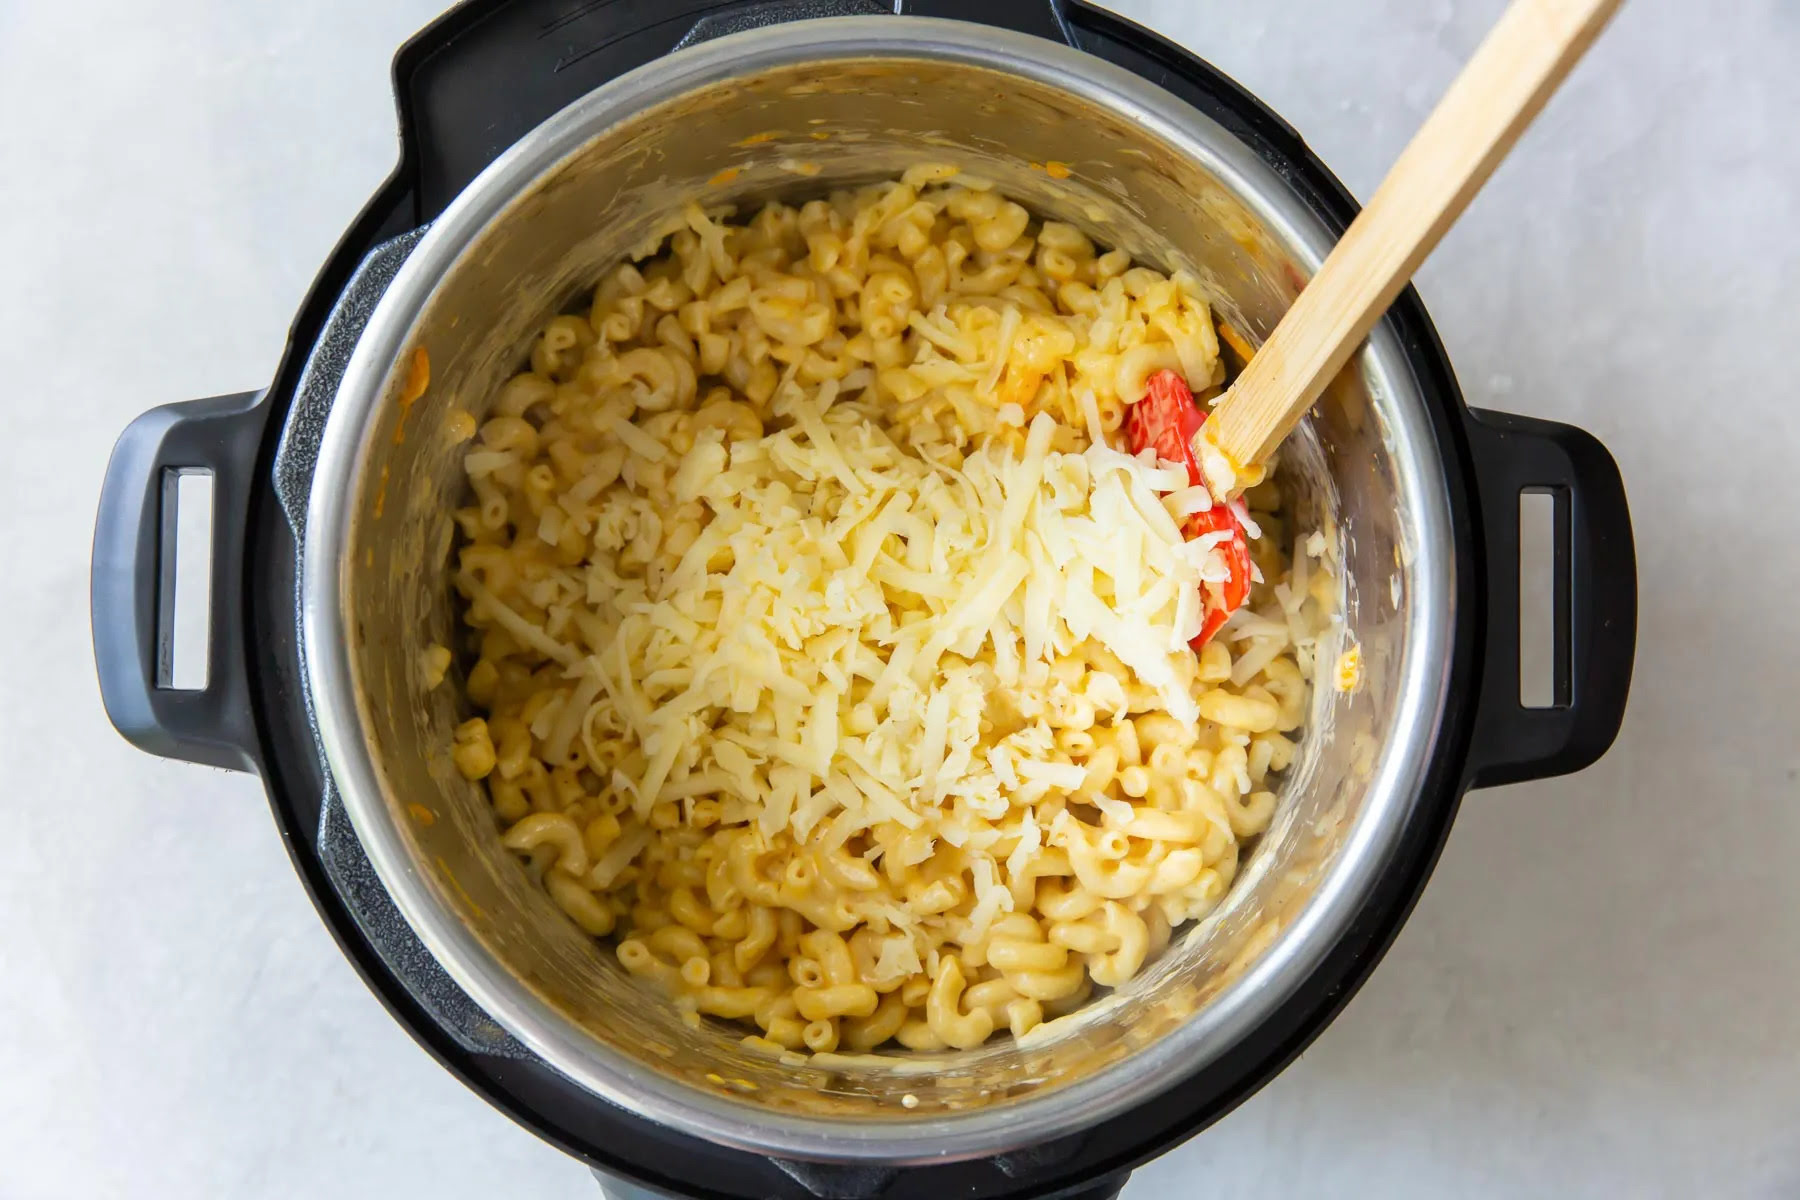 How Do You Cook Mac And Cheese In Electric Pressure Cooker